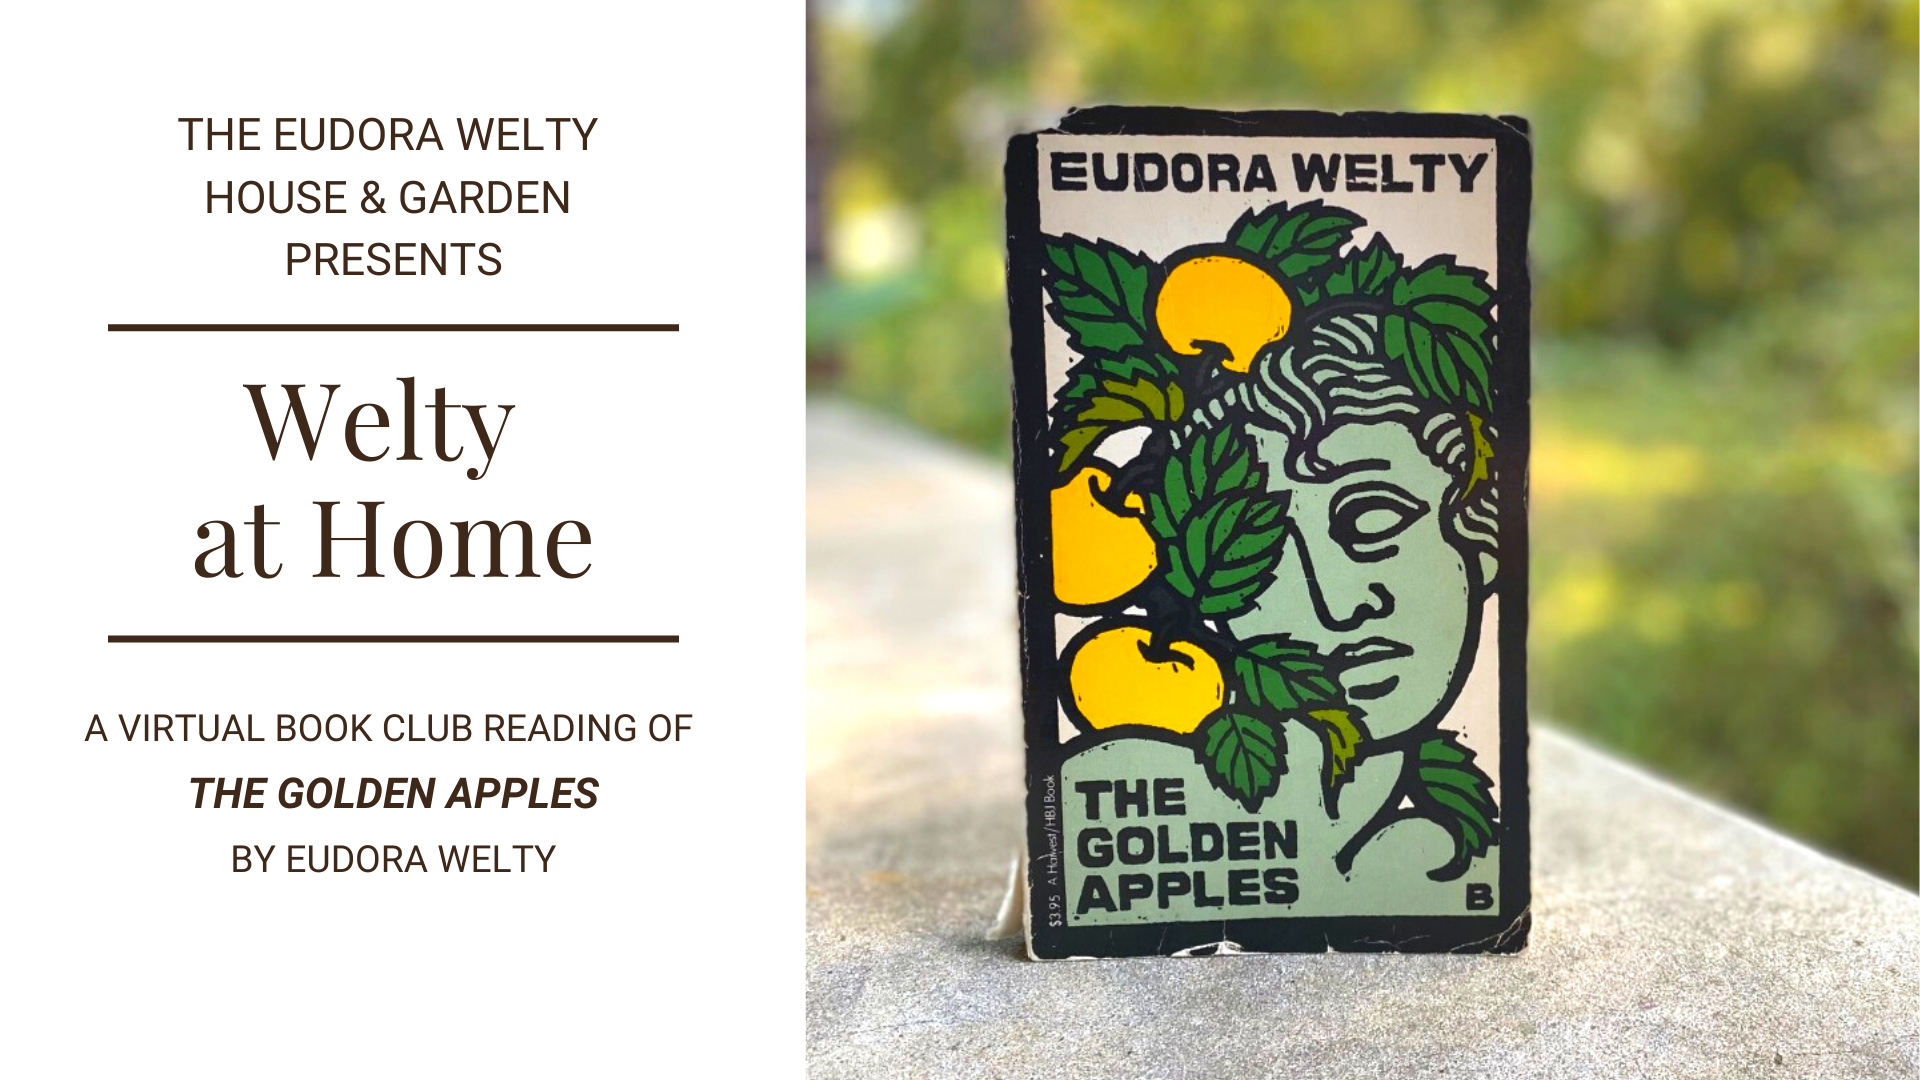 Photo of The Golden Apples by Eudora Welty